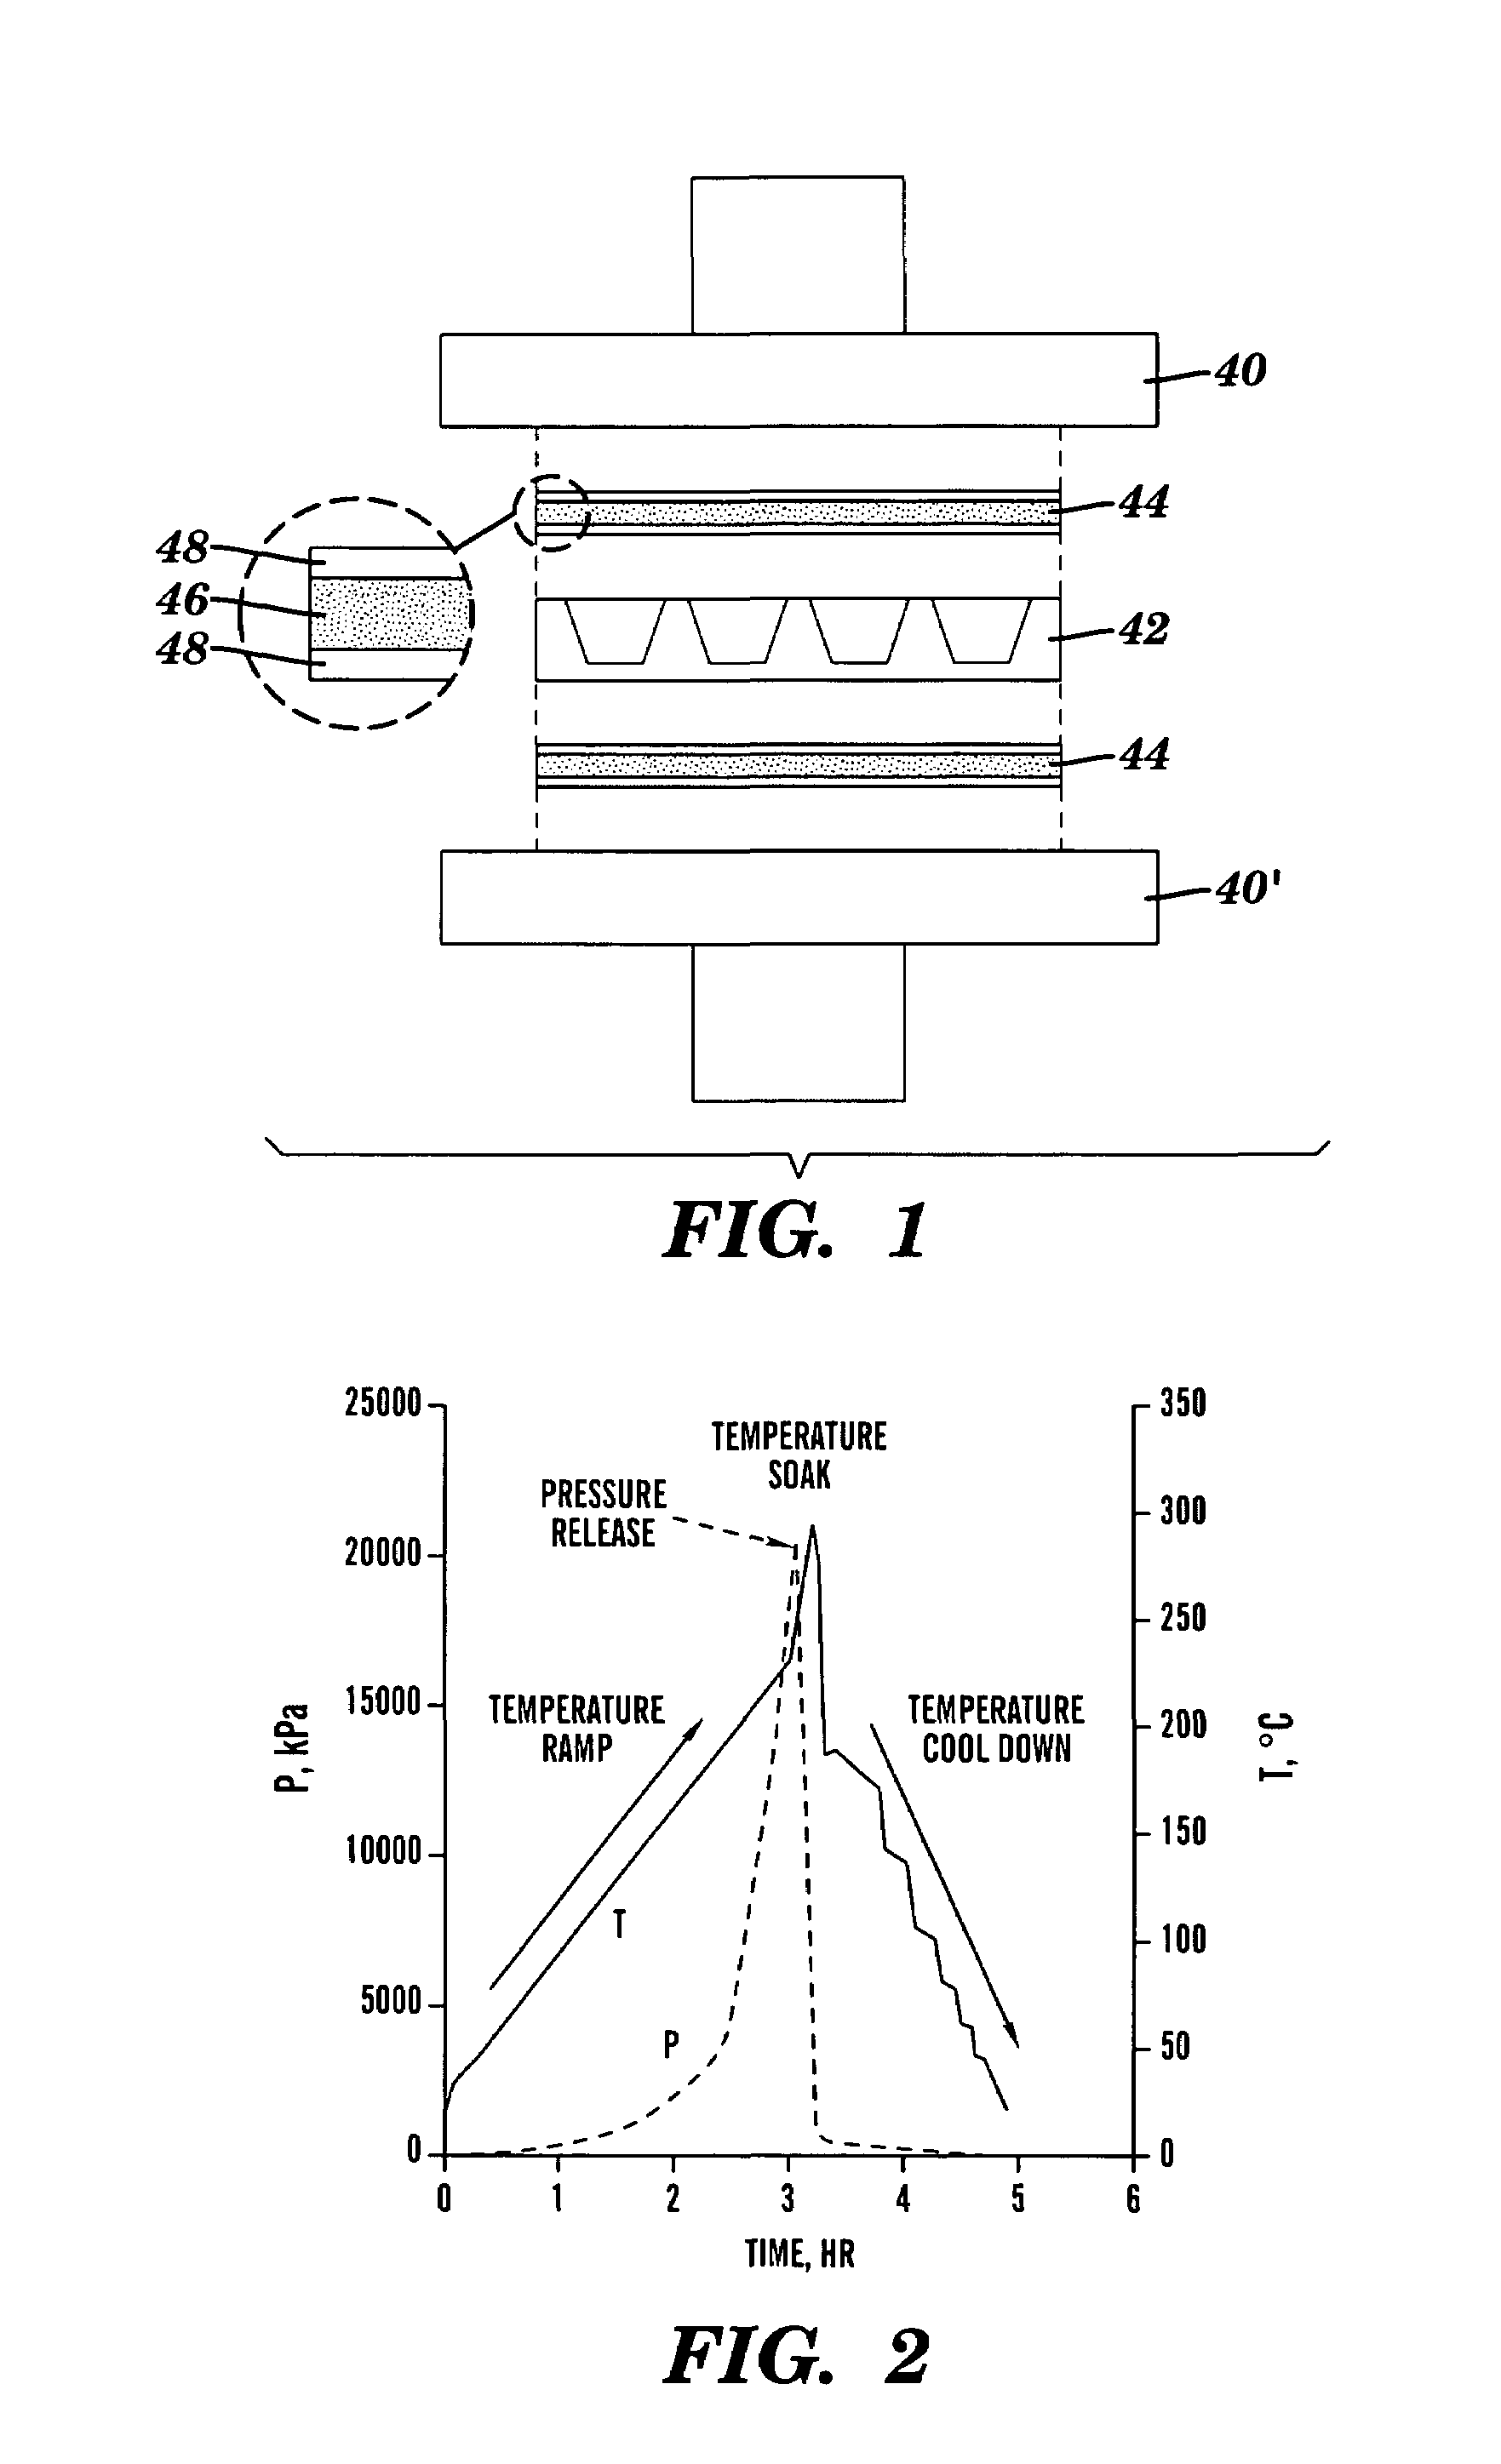 Method and device for fabricating aerogels and aerogel monoliths obtained thereby